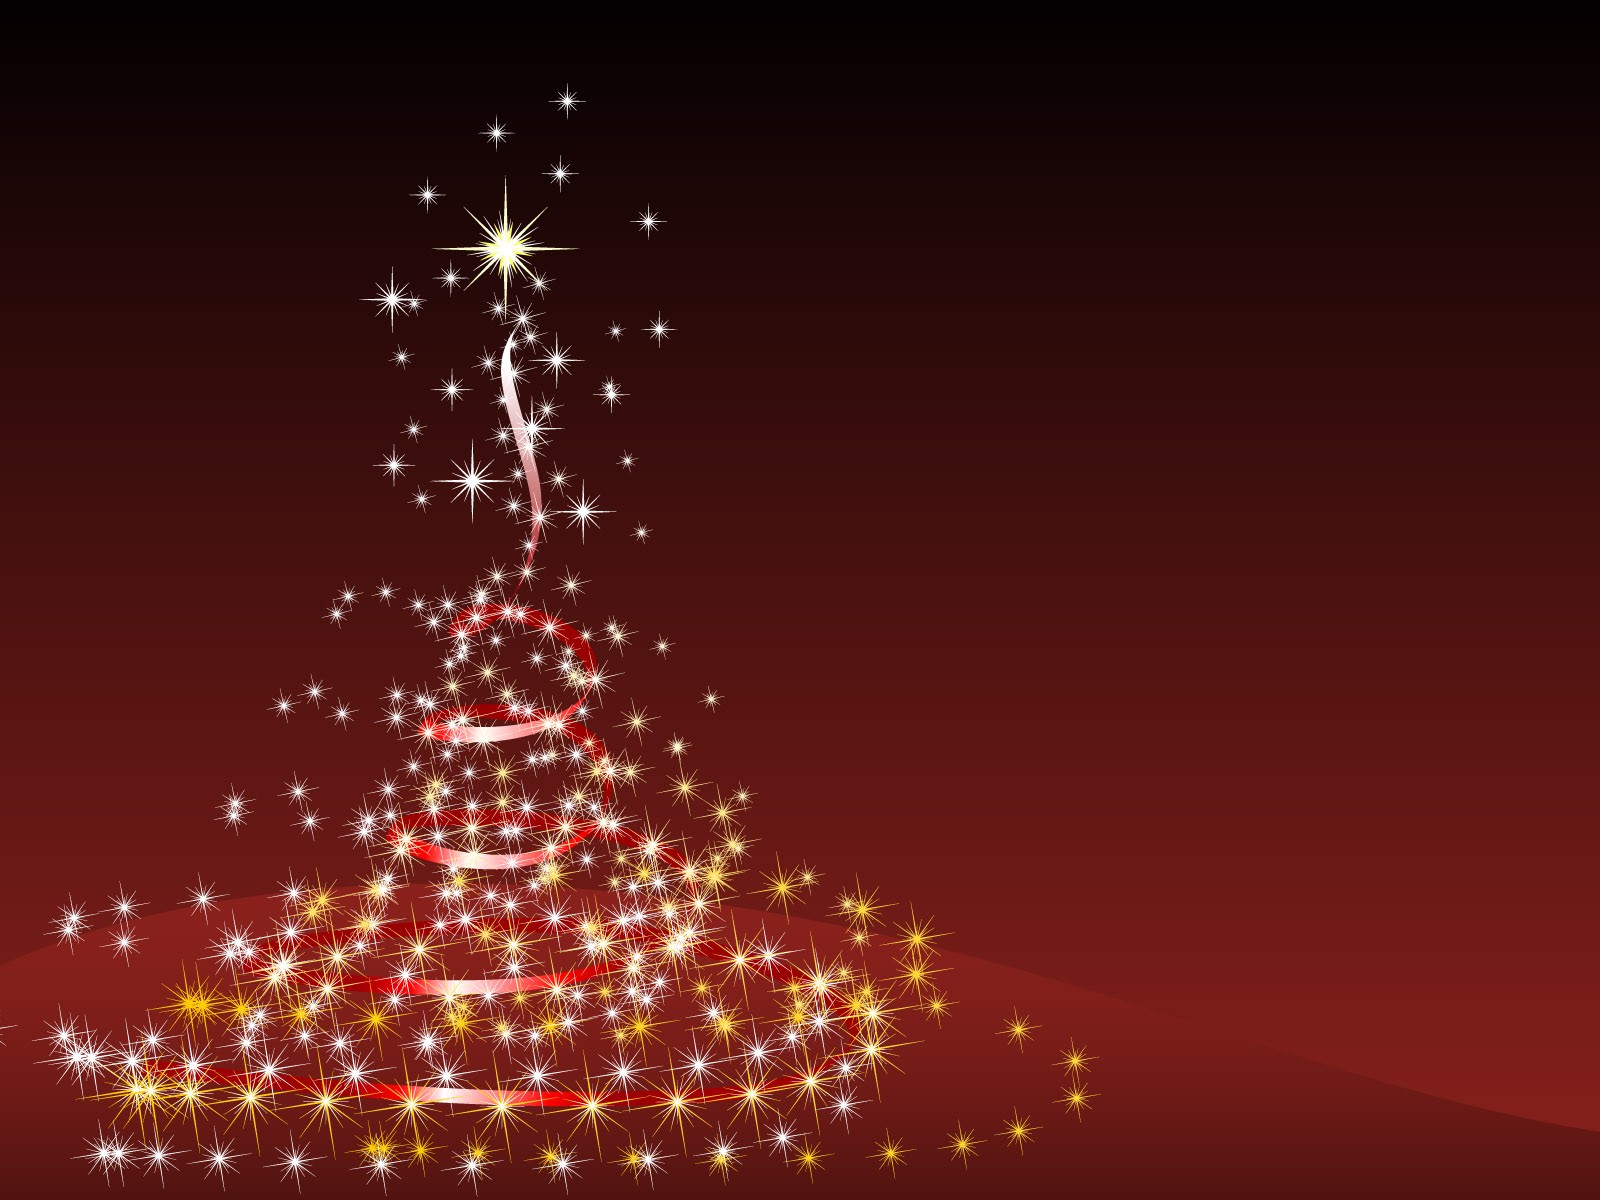 Exquisite Christmas Theme HD Wallpapers #4 - 1600x1200